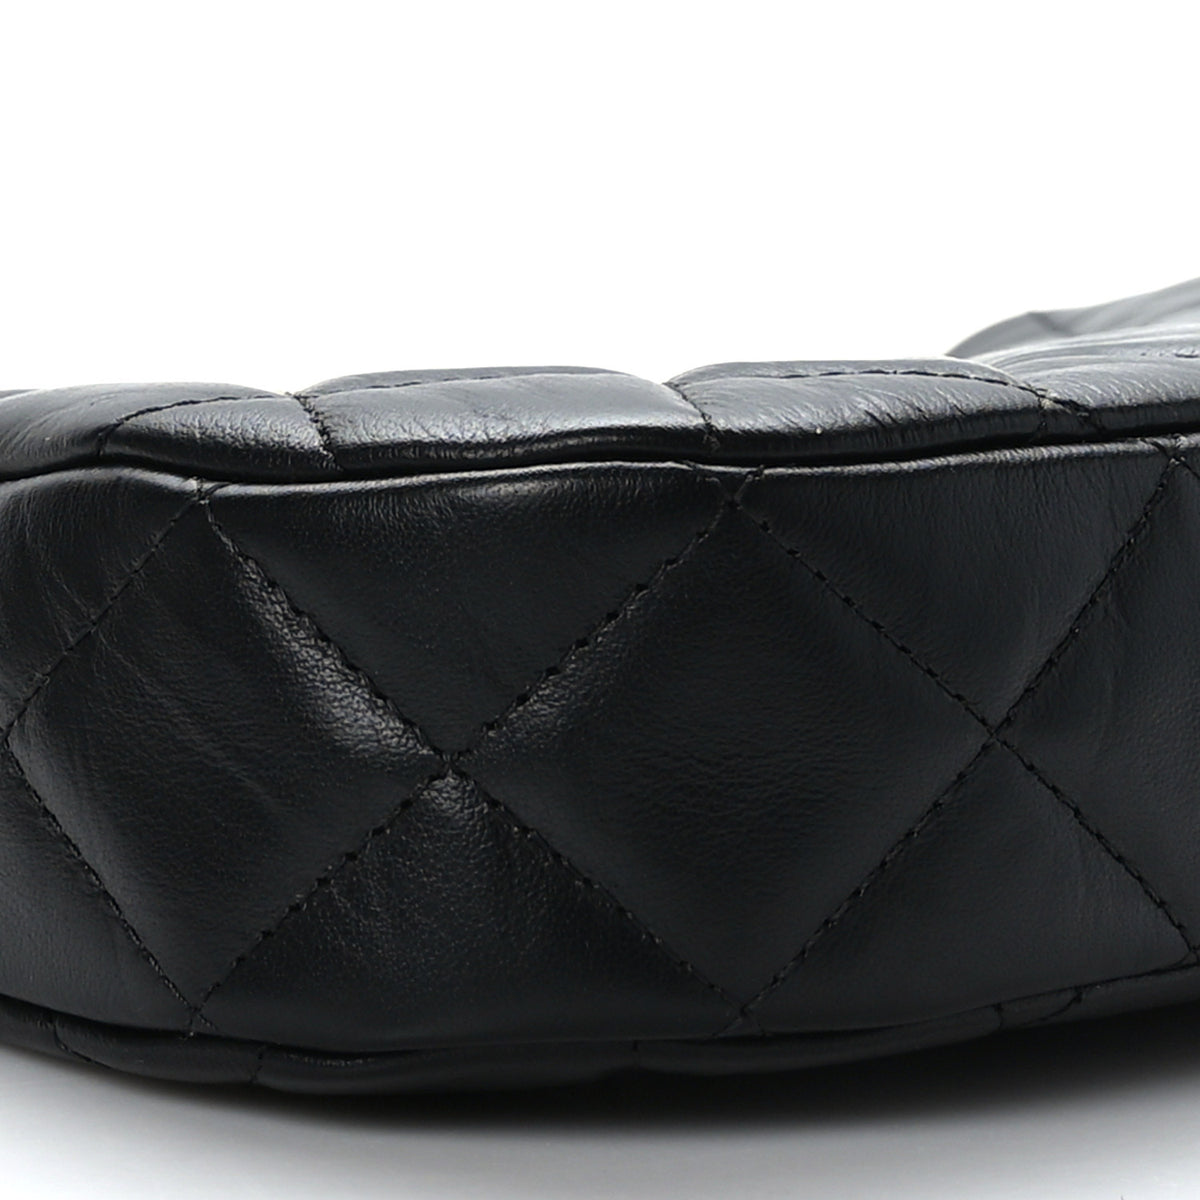 Aged Calfskin Quilted Bag